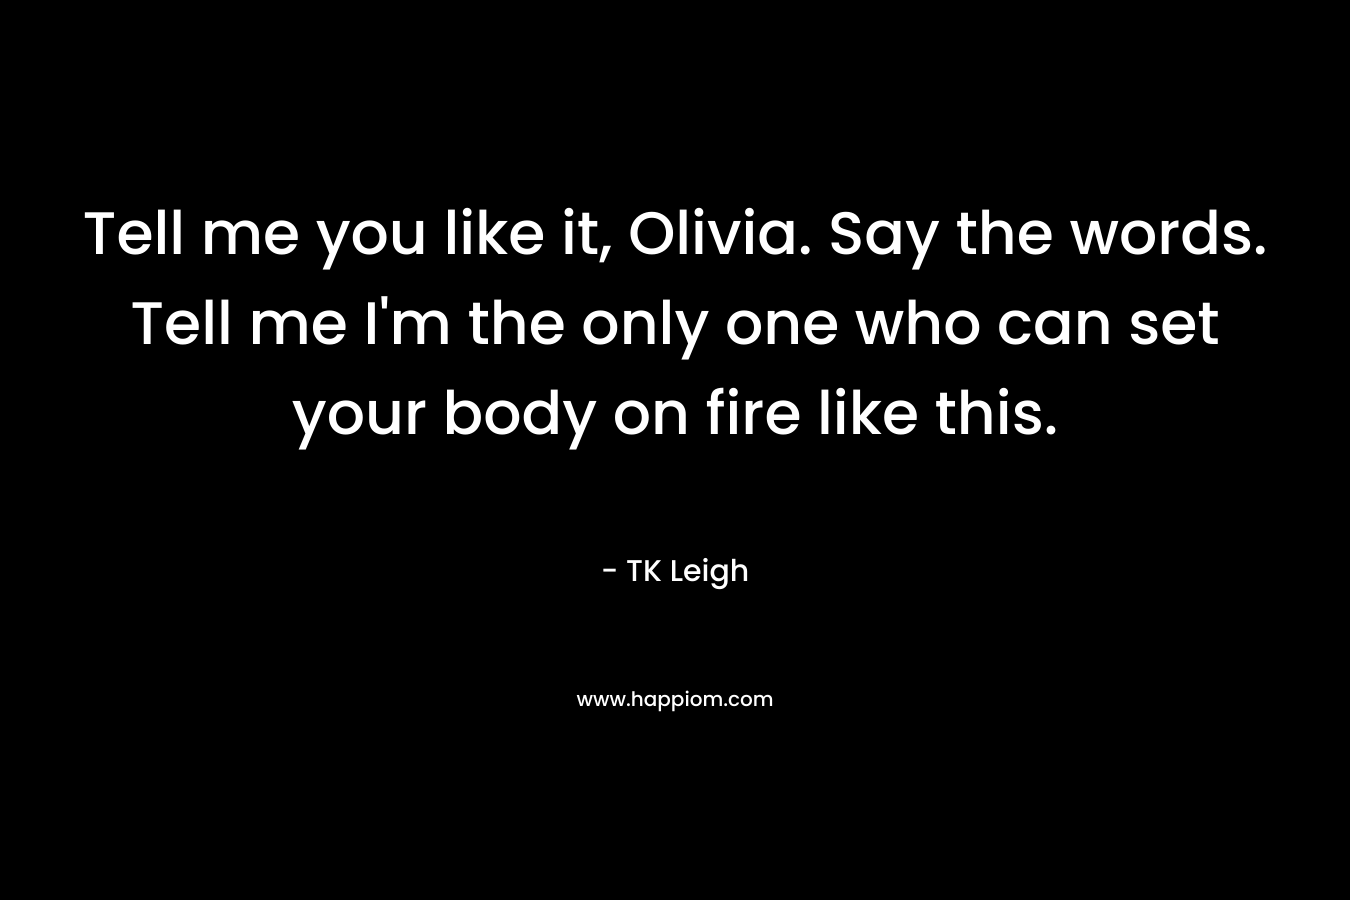 Tell me you like it, Olivia. Say the words. Tell me I'm the only one who can set your body on fire like this.